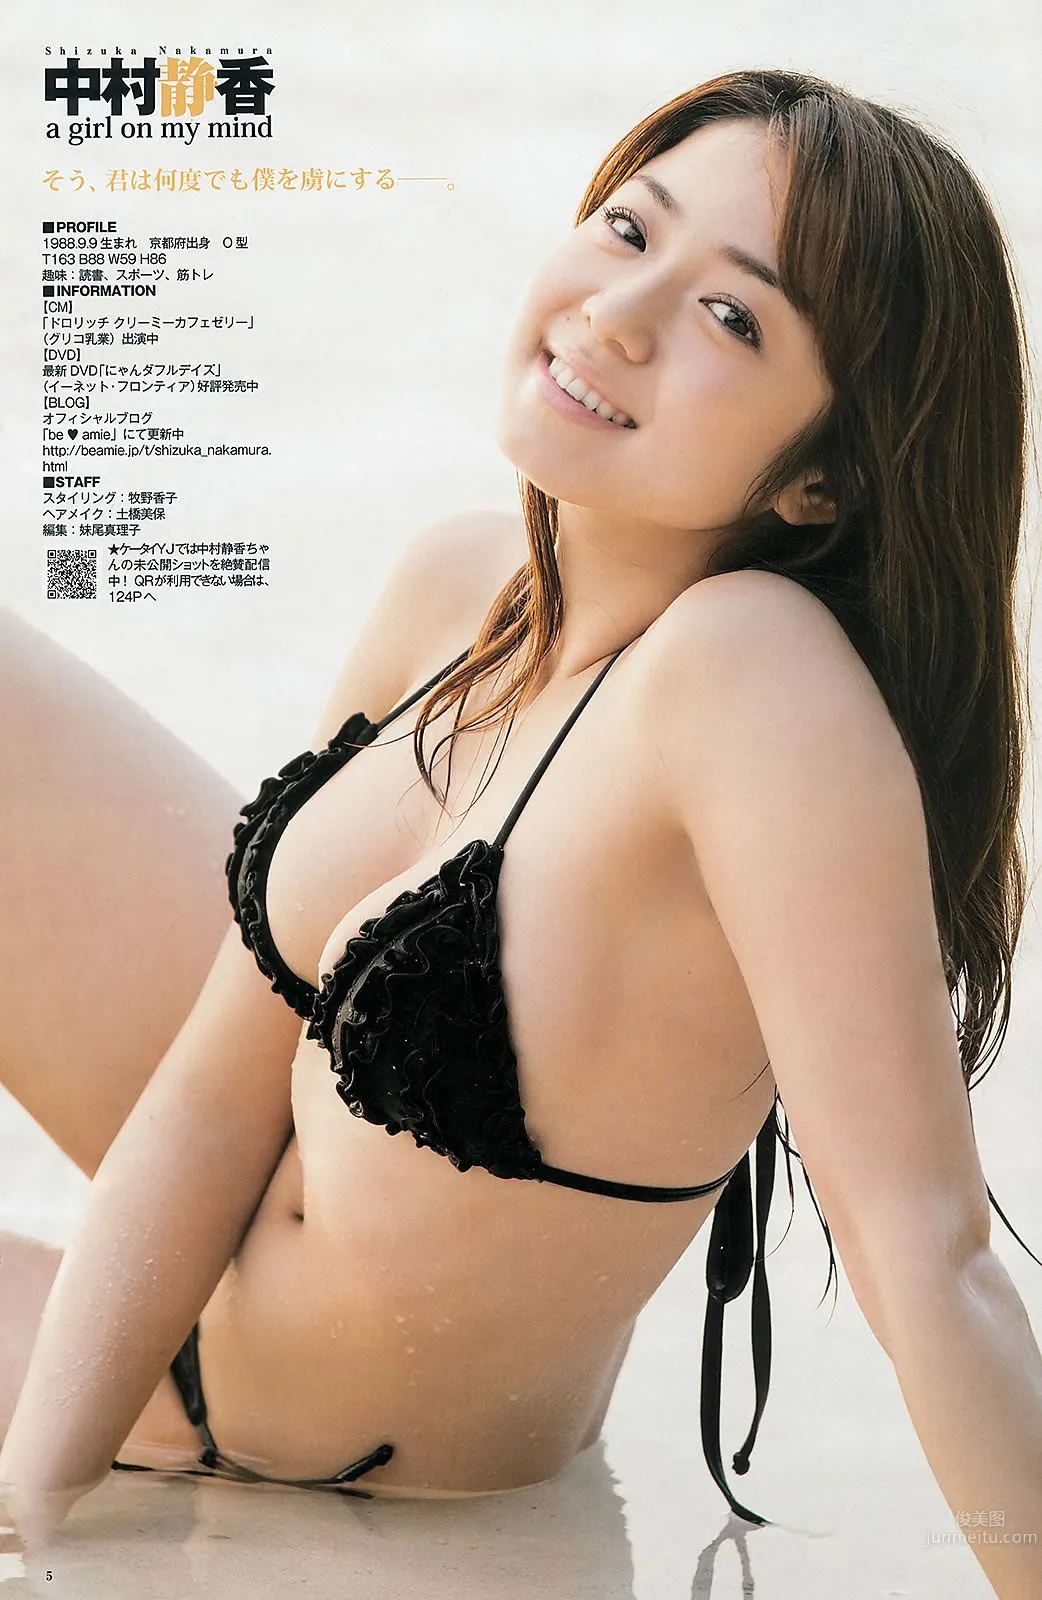 [Weekly Young Jump] 2013 No.18 19 日南响子 中村静香 モーニング娘。 西内まりや [28P]_22